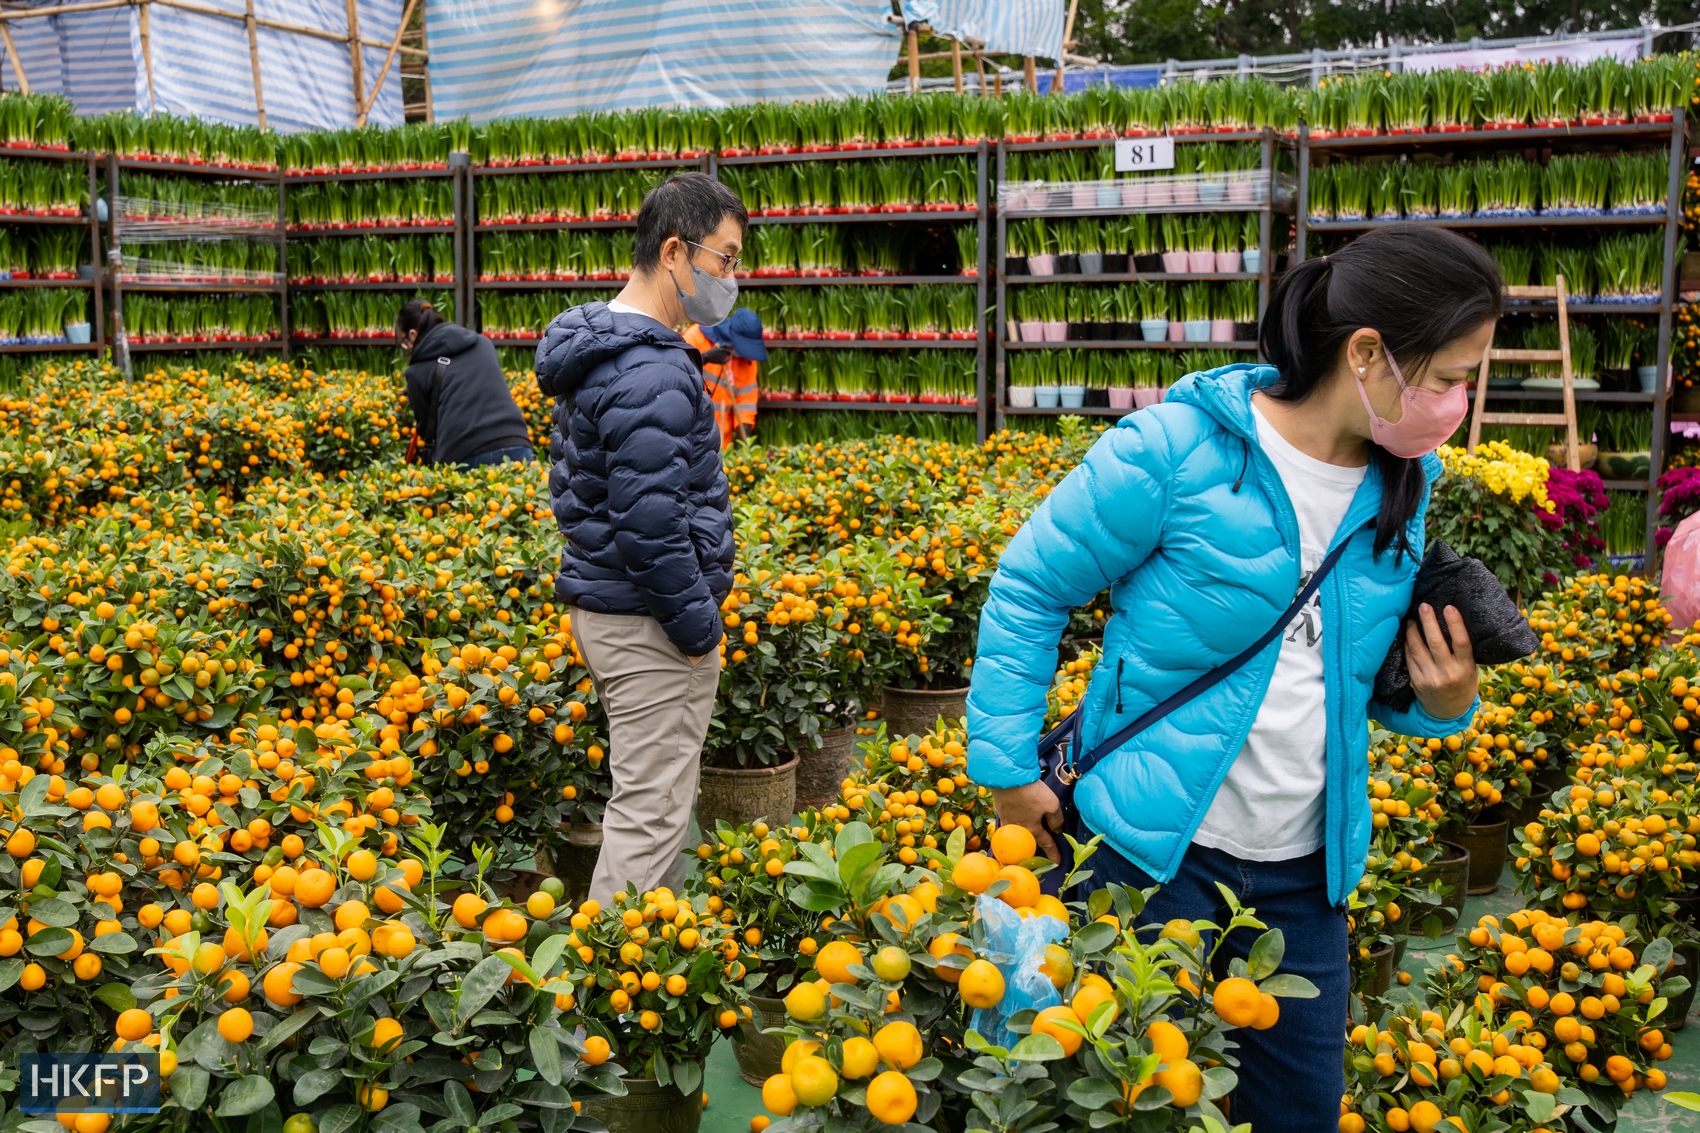 People browse flower stalls at a Lunar New Year fair in Causeway Bay, Hong Kong, in January 2023. Photo: Kyle Lam/HKFP.